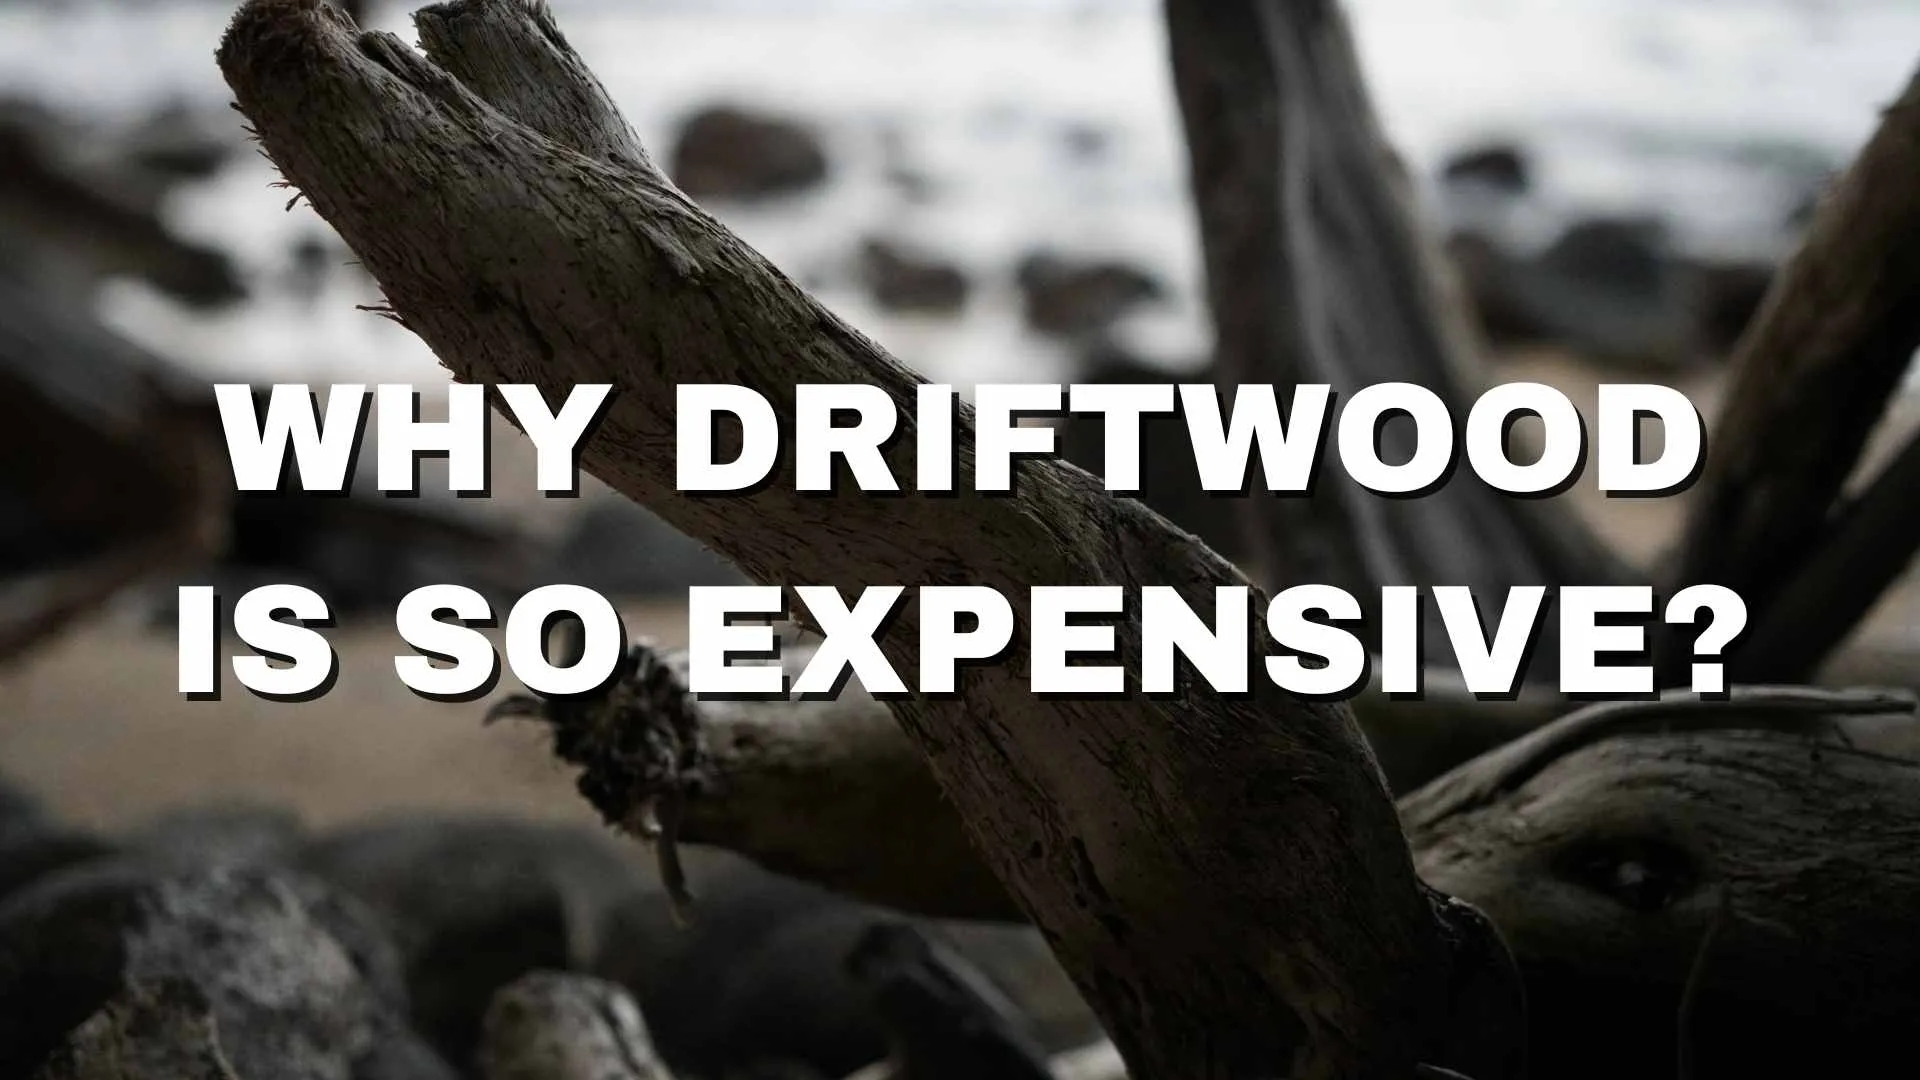 5 reasons why driftwood is so expensive